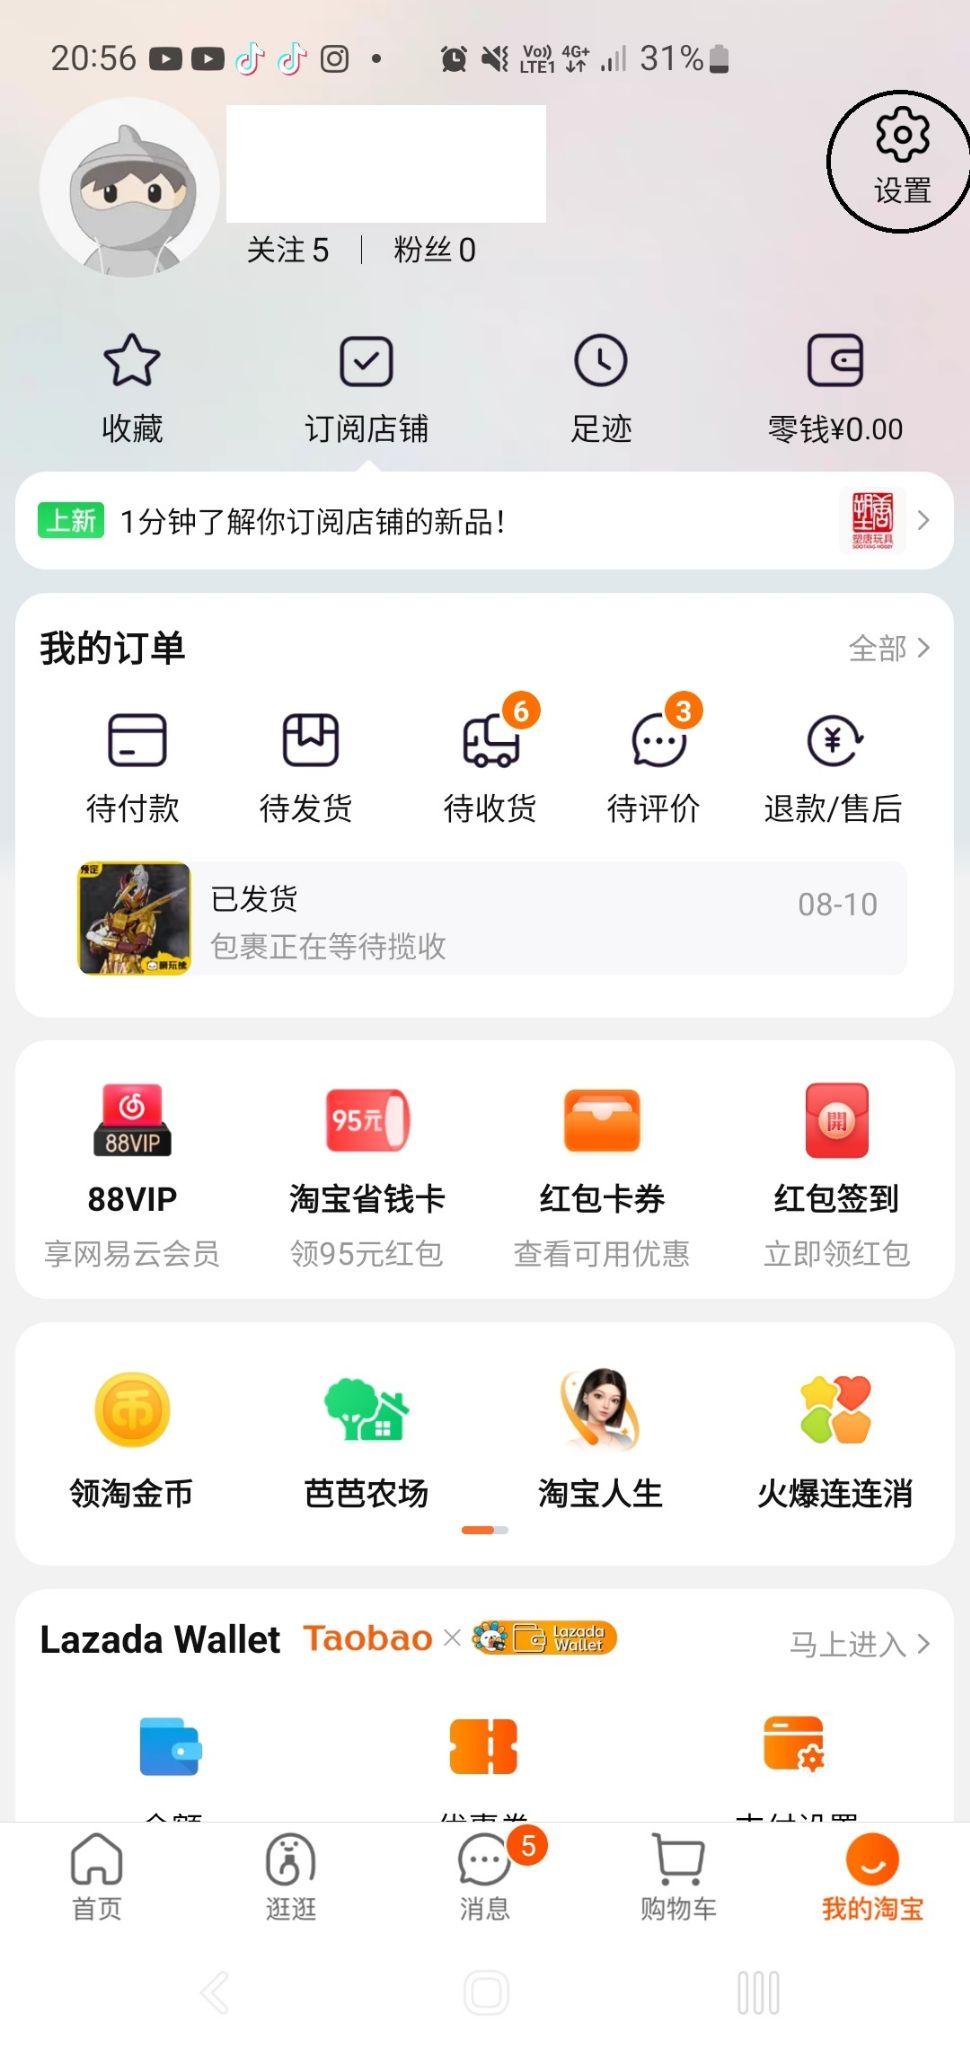 Contact Taobao customer support on mobile to chat with seller on Taobao